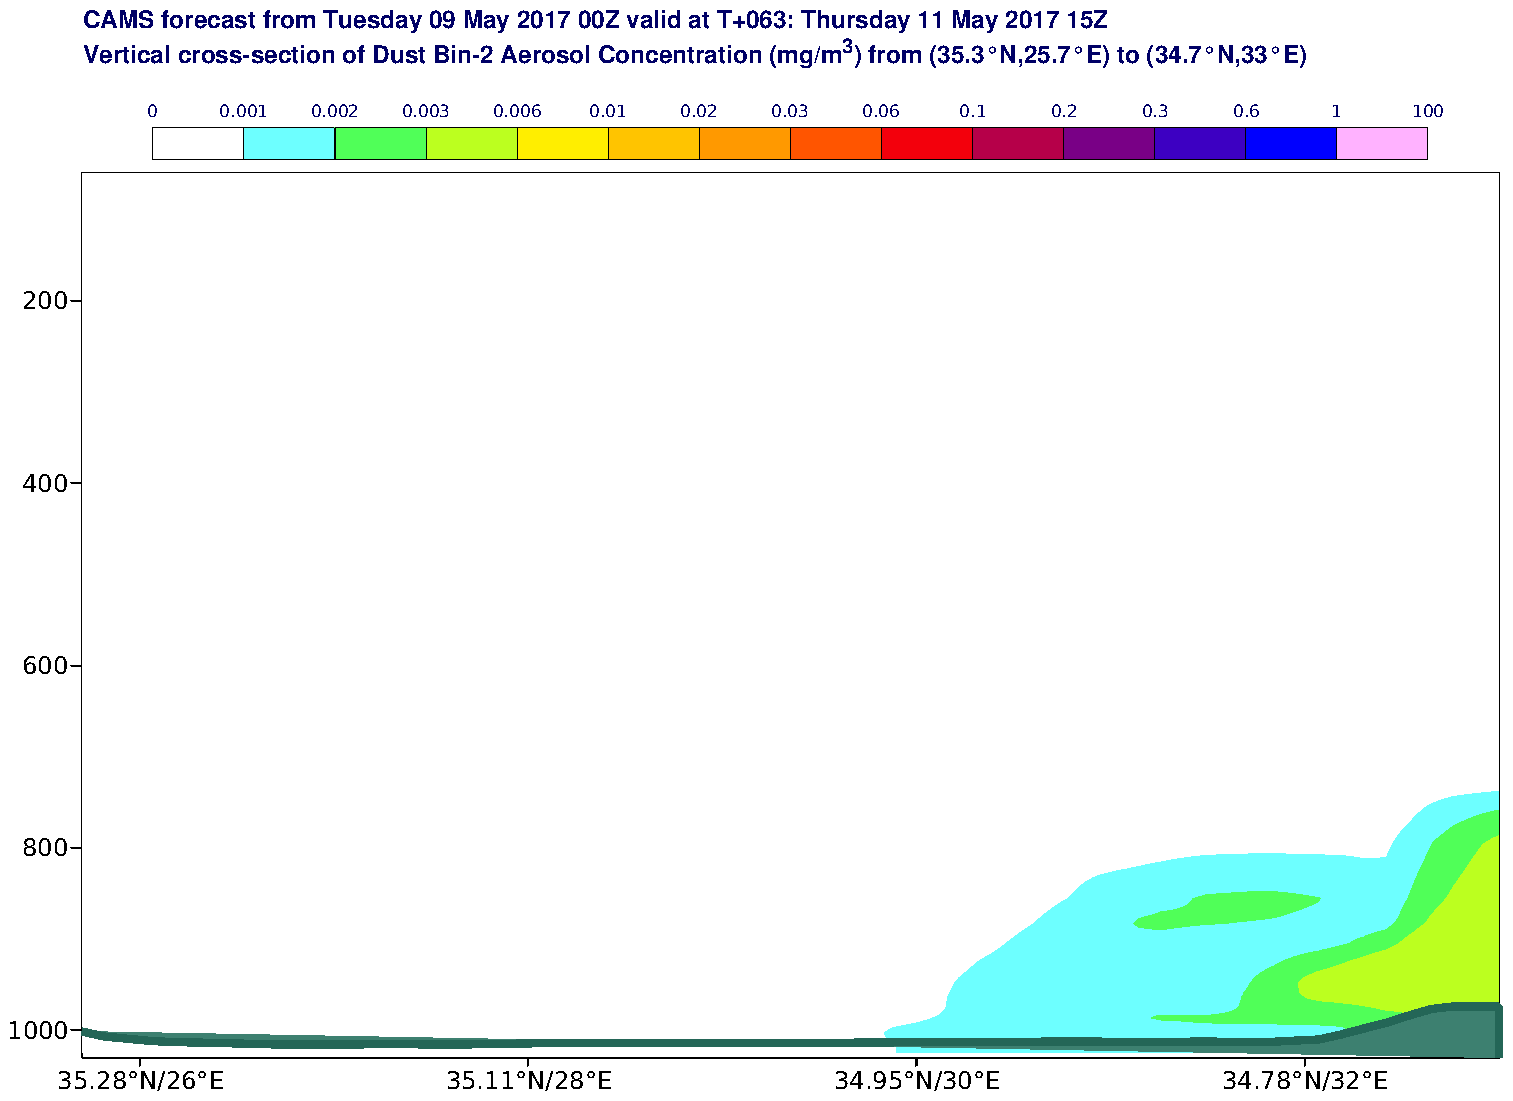 Vertical cross-section of Dust Bin-2 Aerosol Concentration (mg/m3) valid at T63 - 2017-05-11 15:00